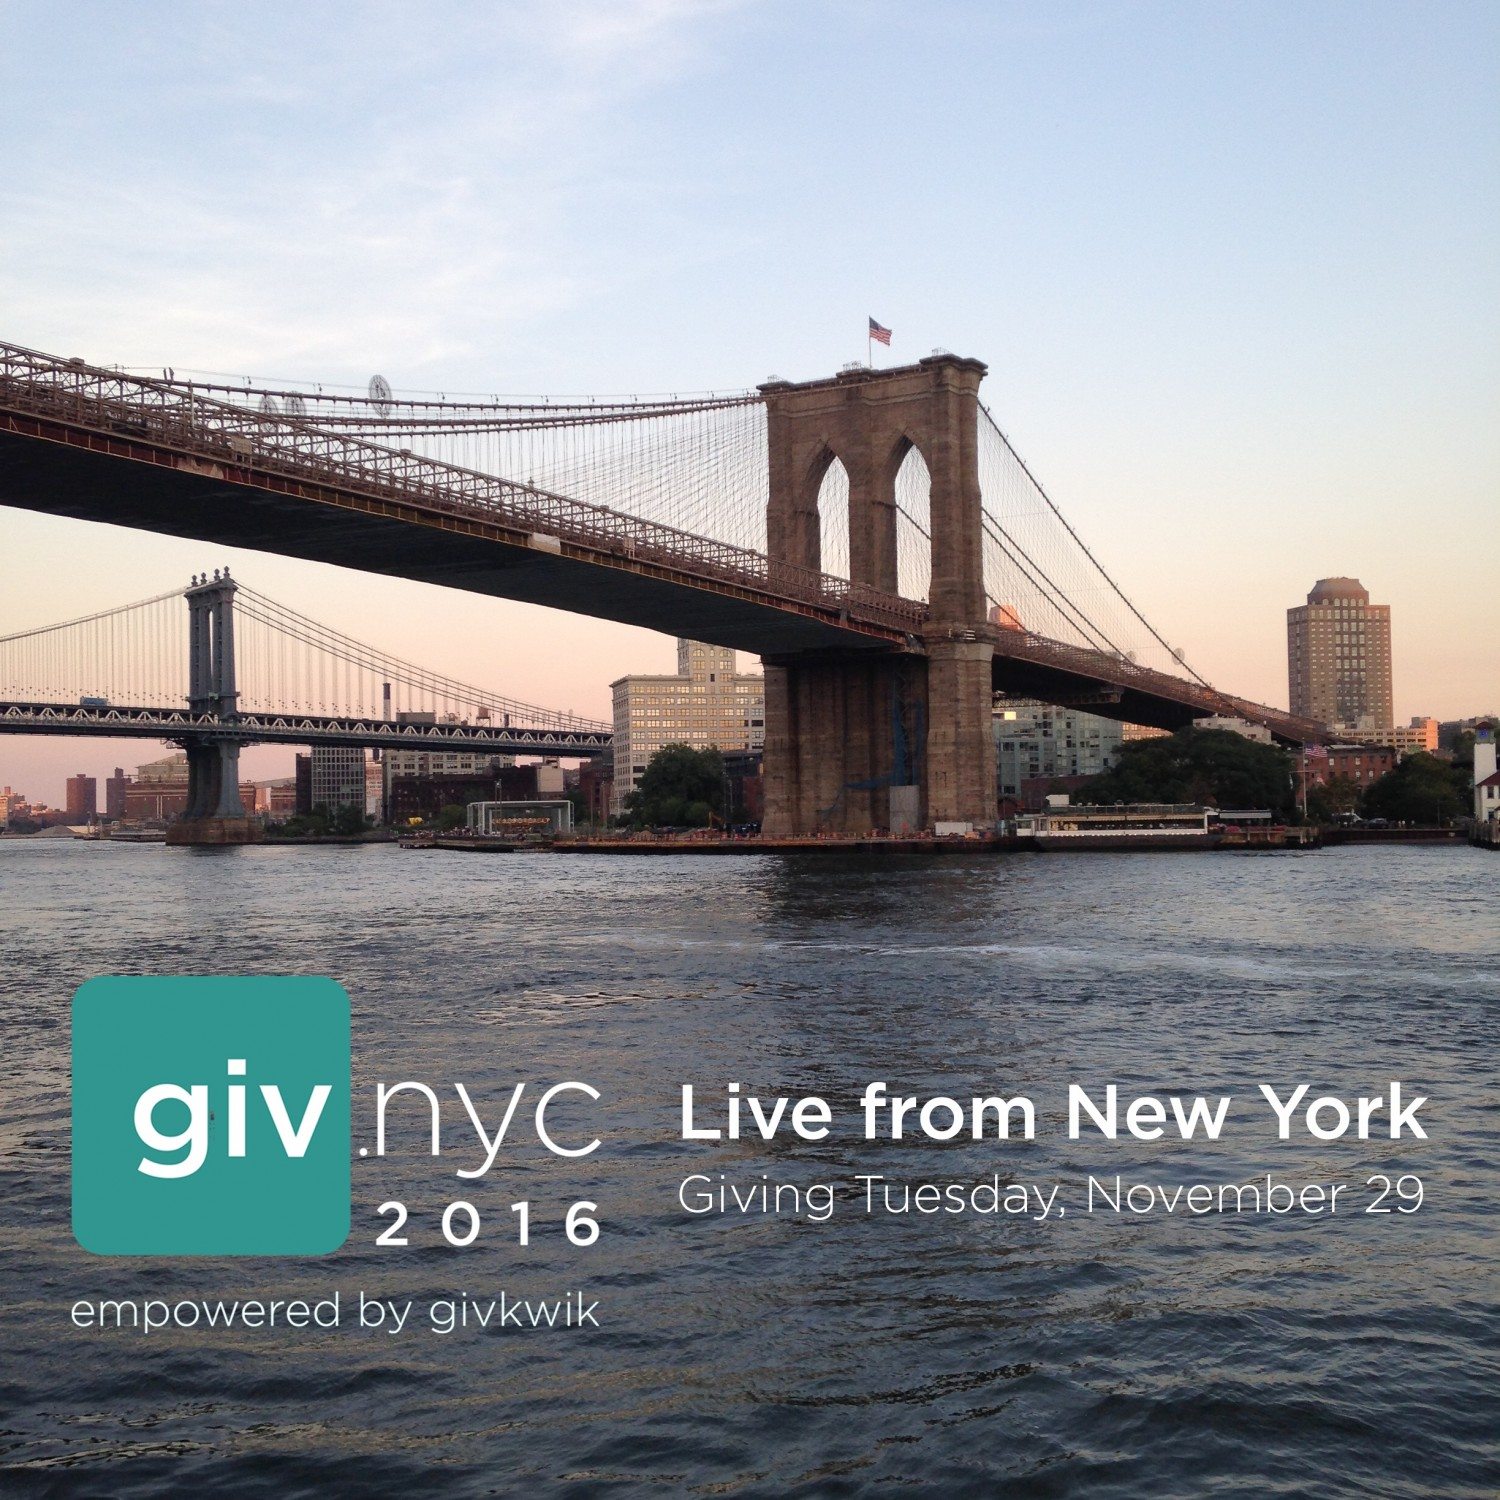 Givkwik to host its annual #GivingTuesday event, GIV.NYC 2016, on Nov. 29